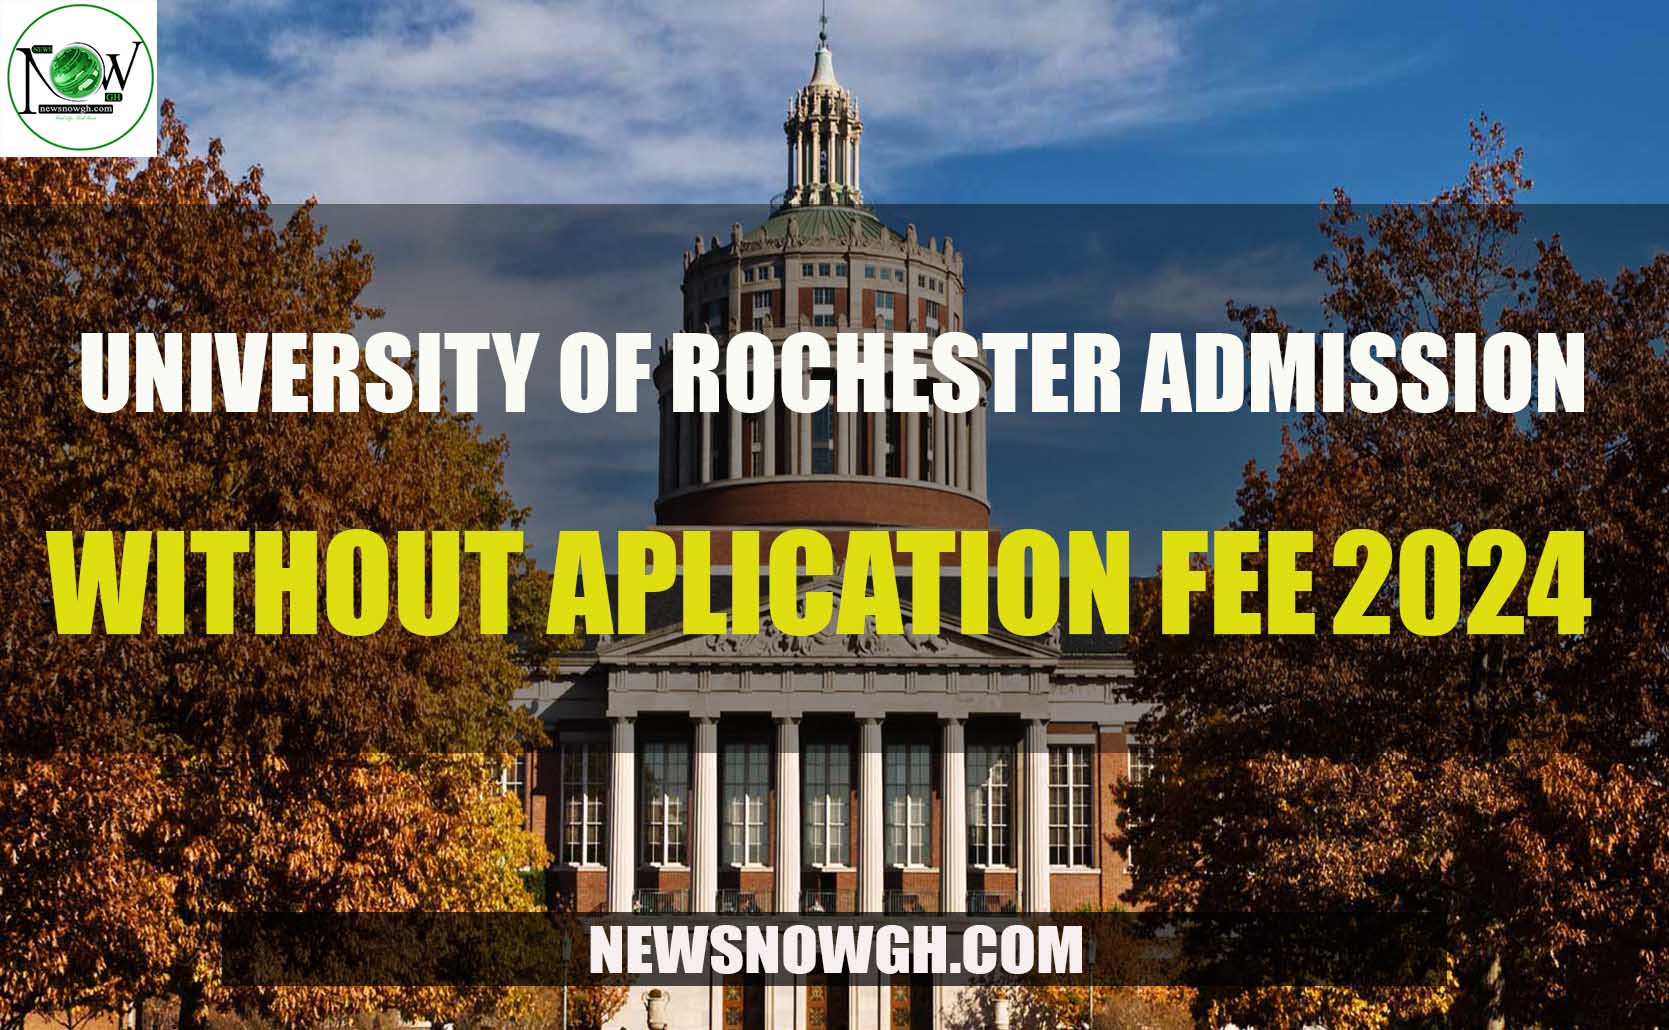 University of Rochester admissions without application fee for 202425